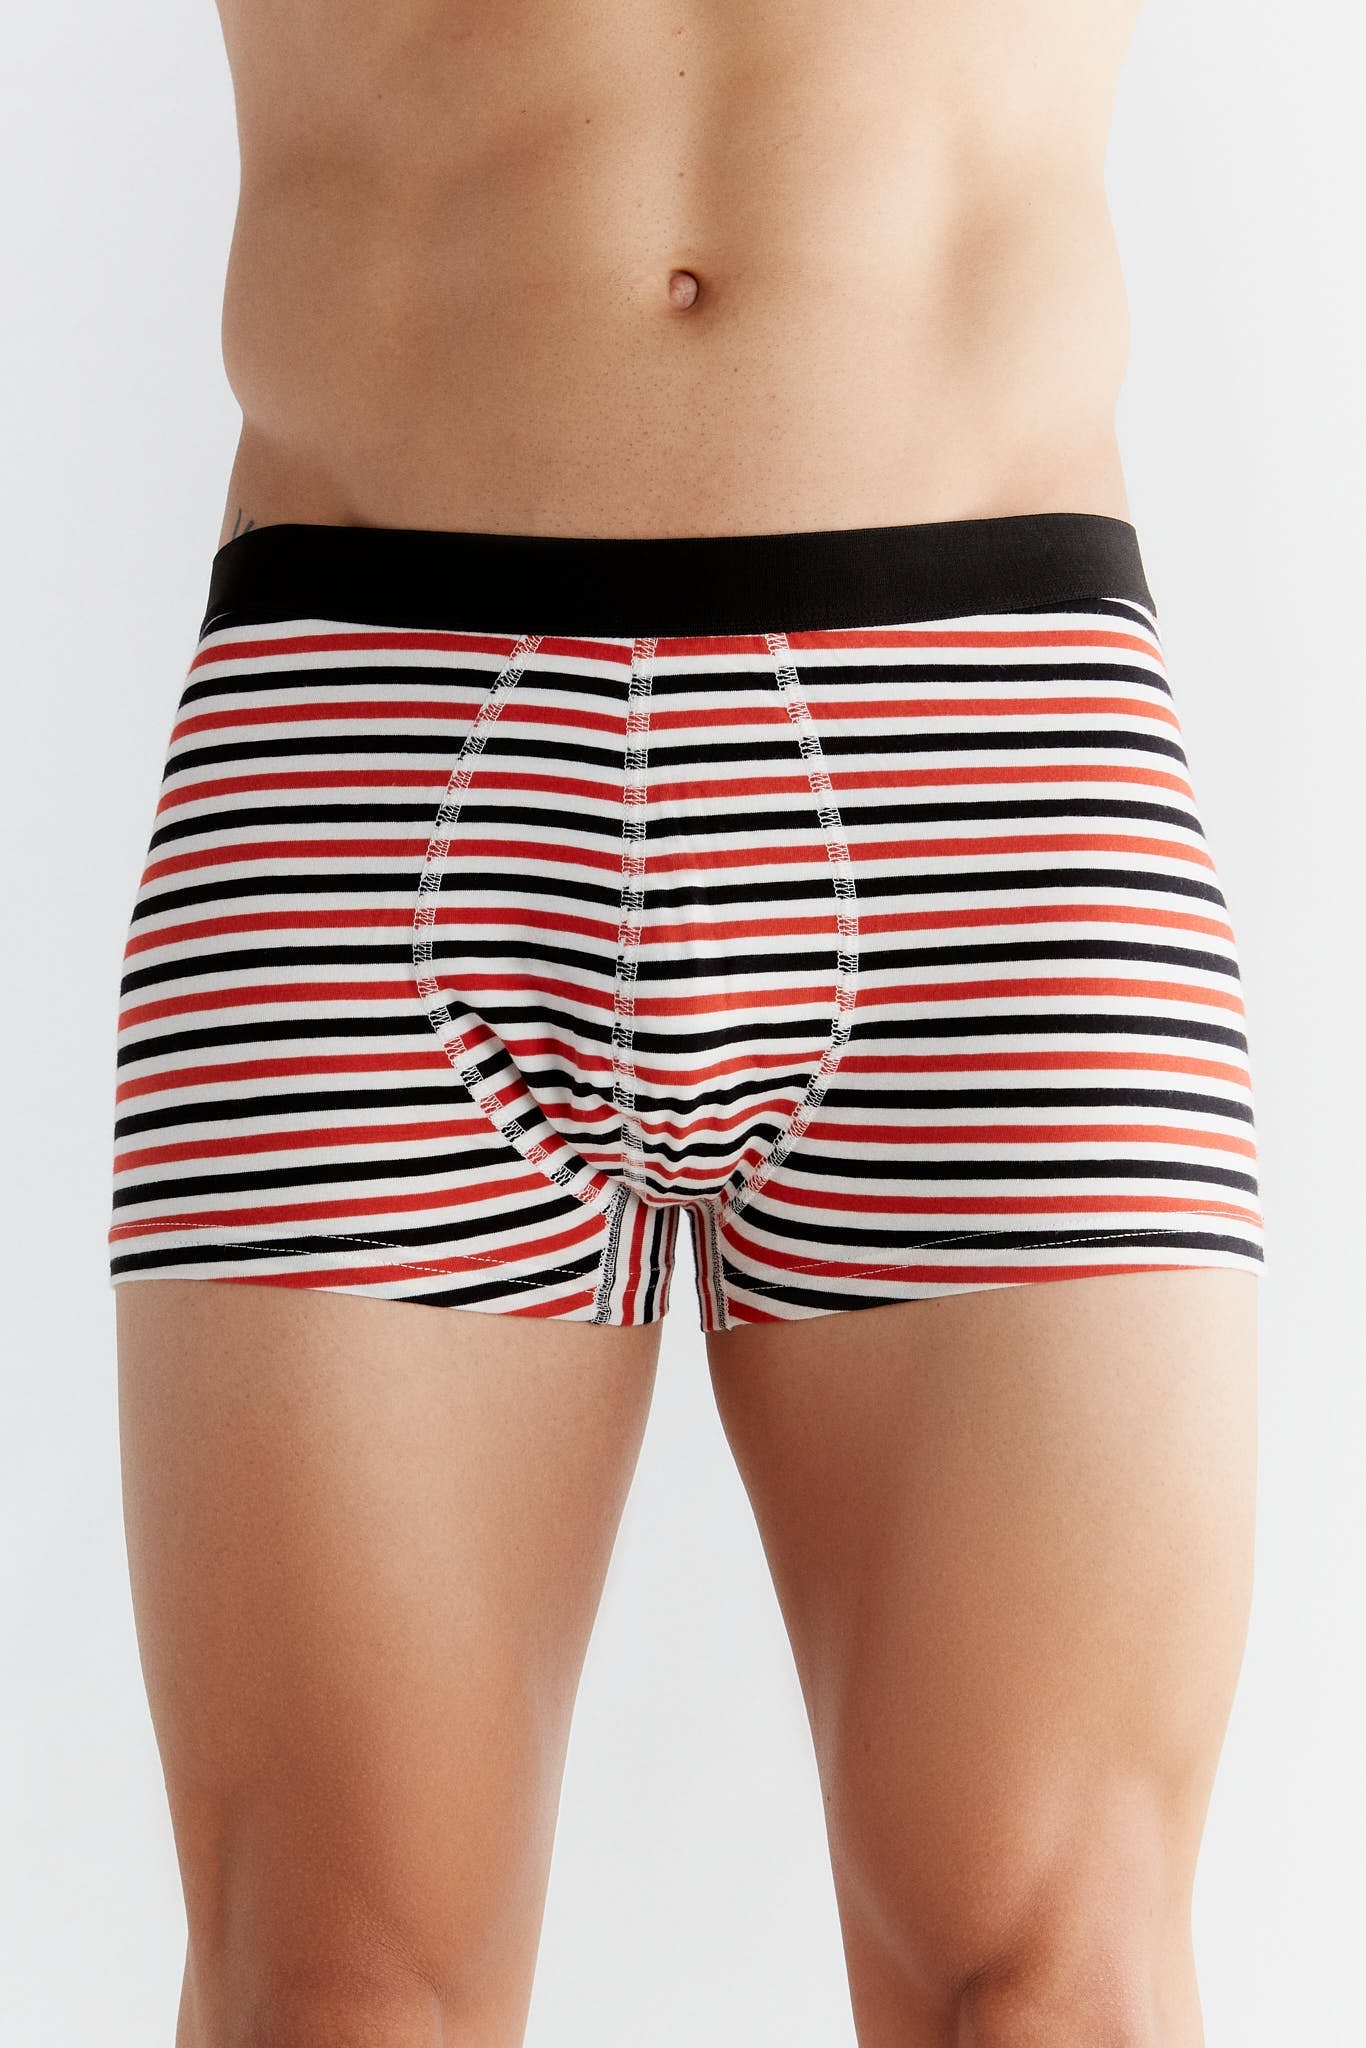 2121-13 | Trunk shorts striped,Off-White-Red-Black